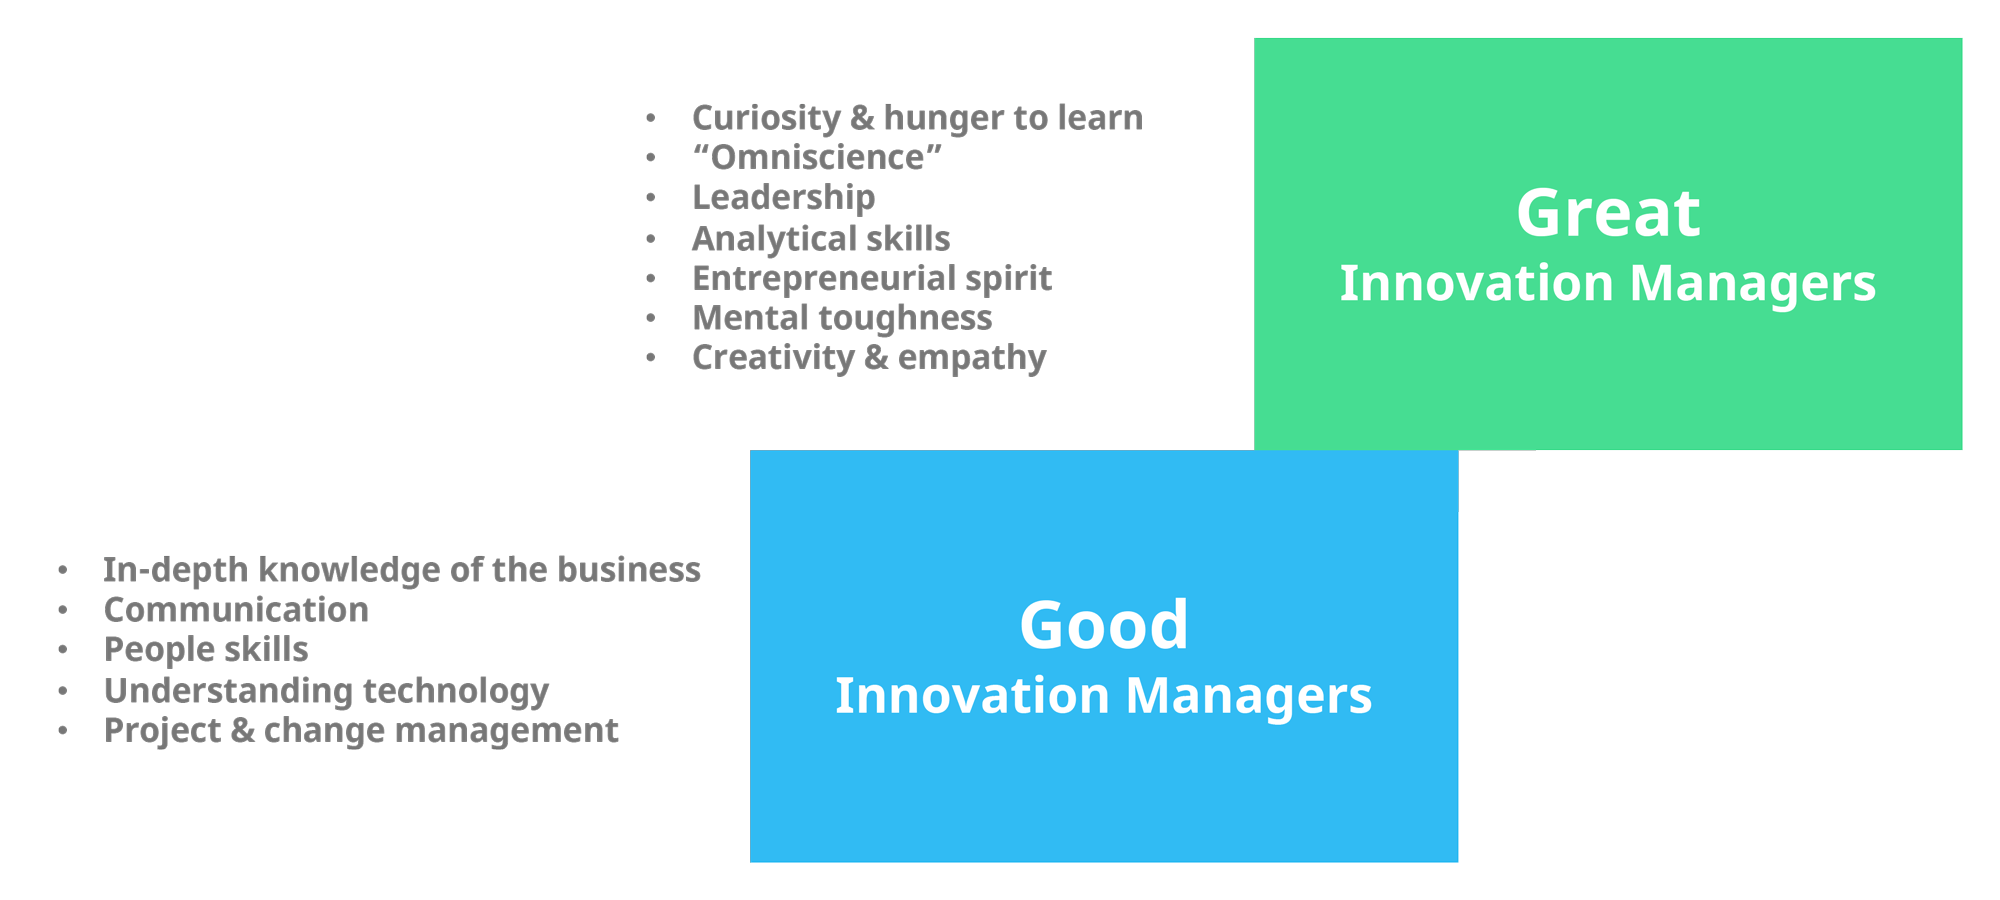 The difference between good and great innovation managers